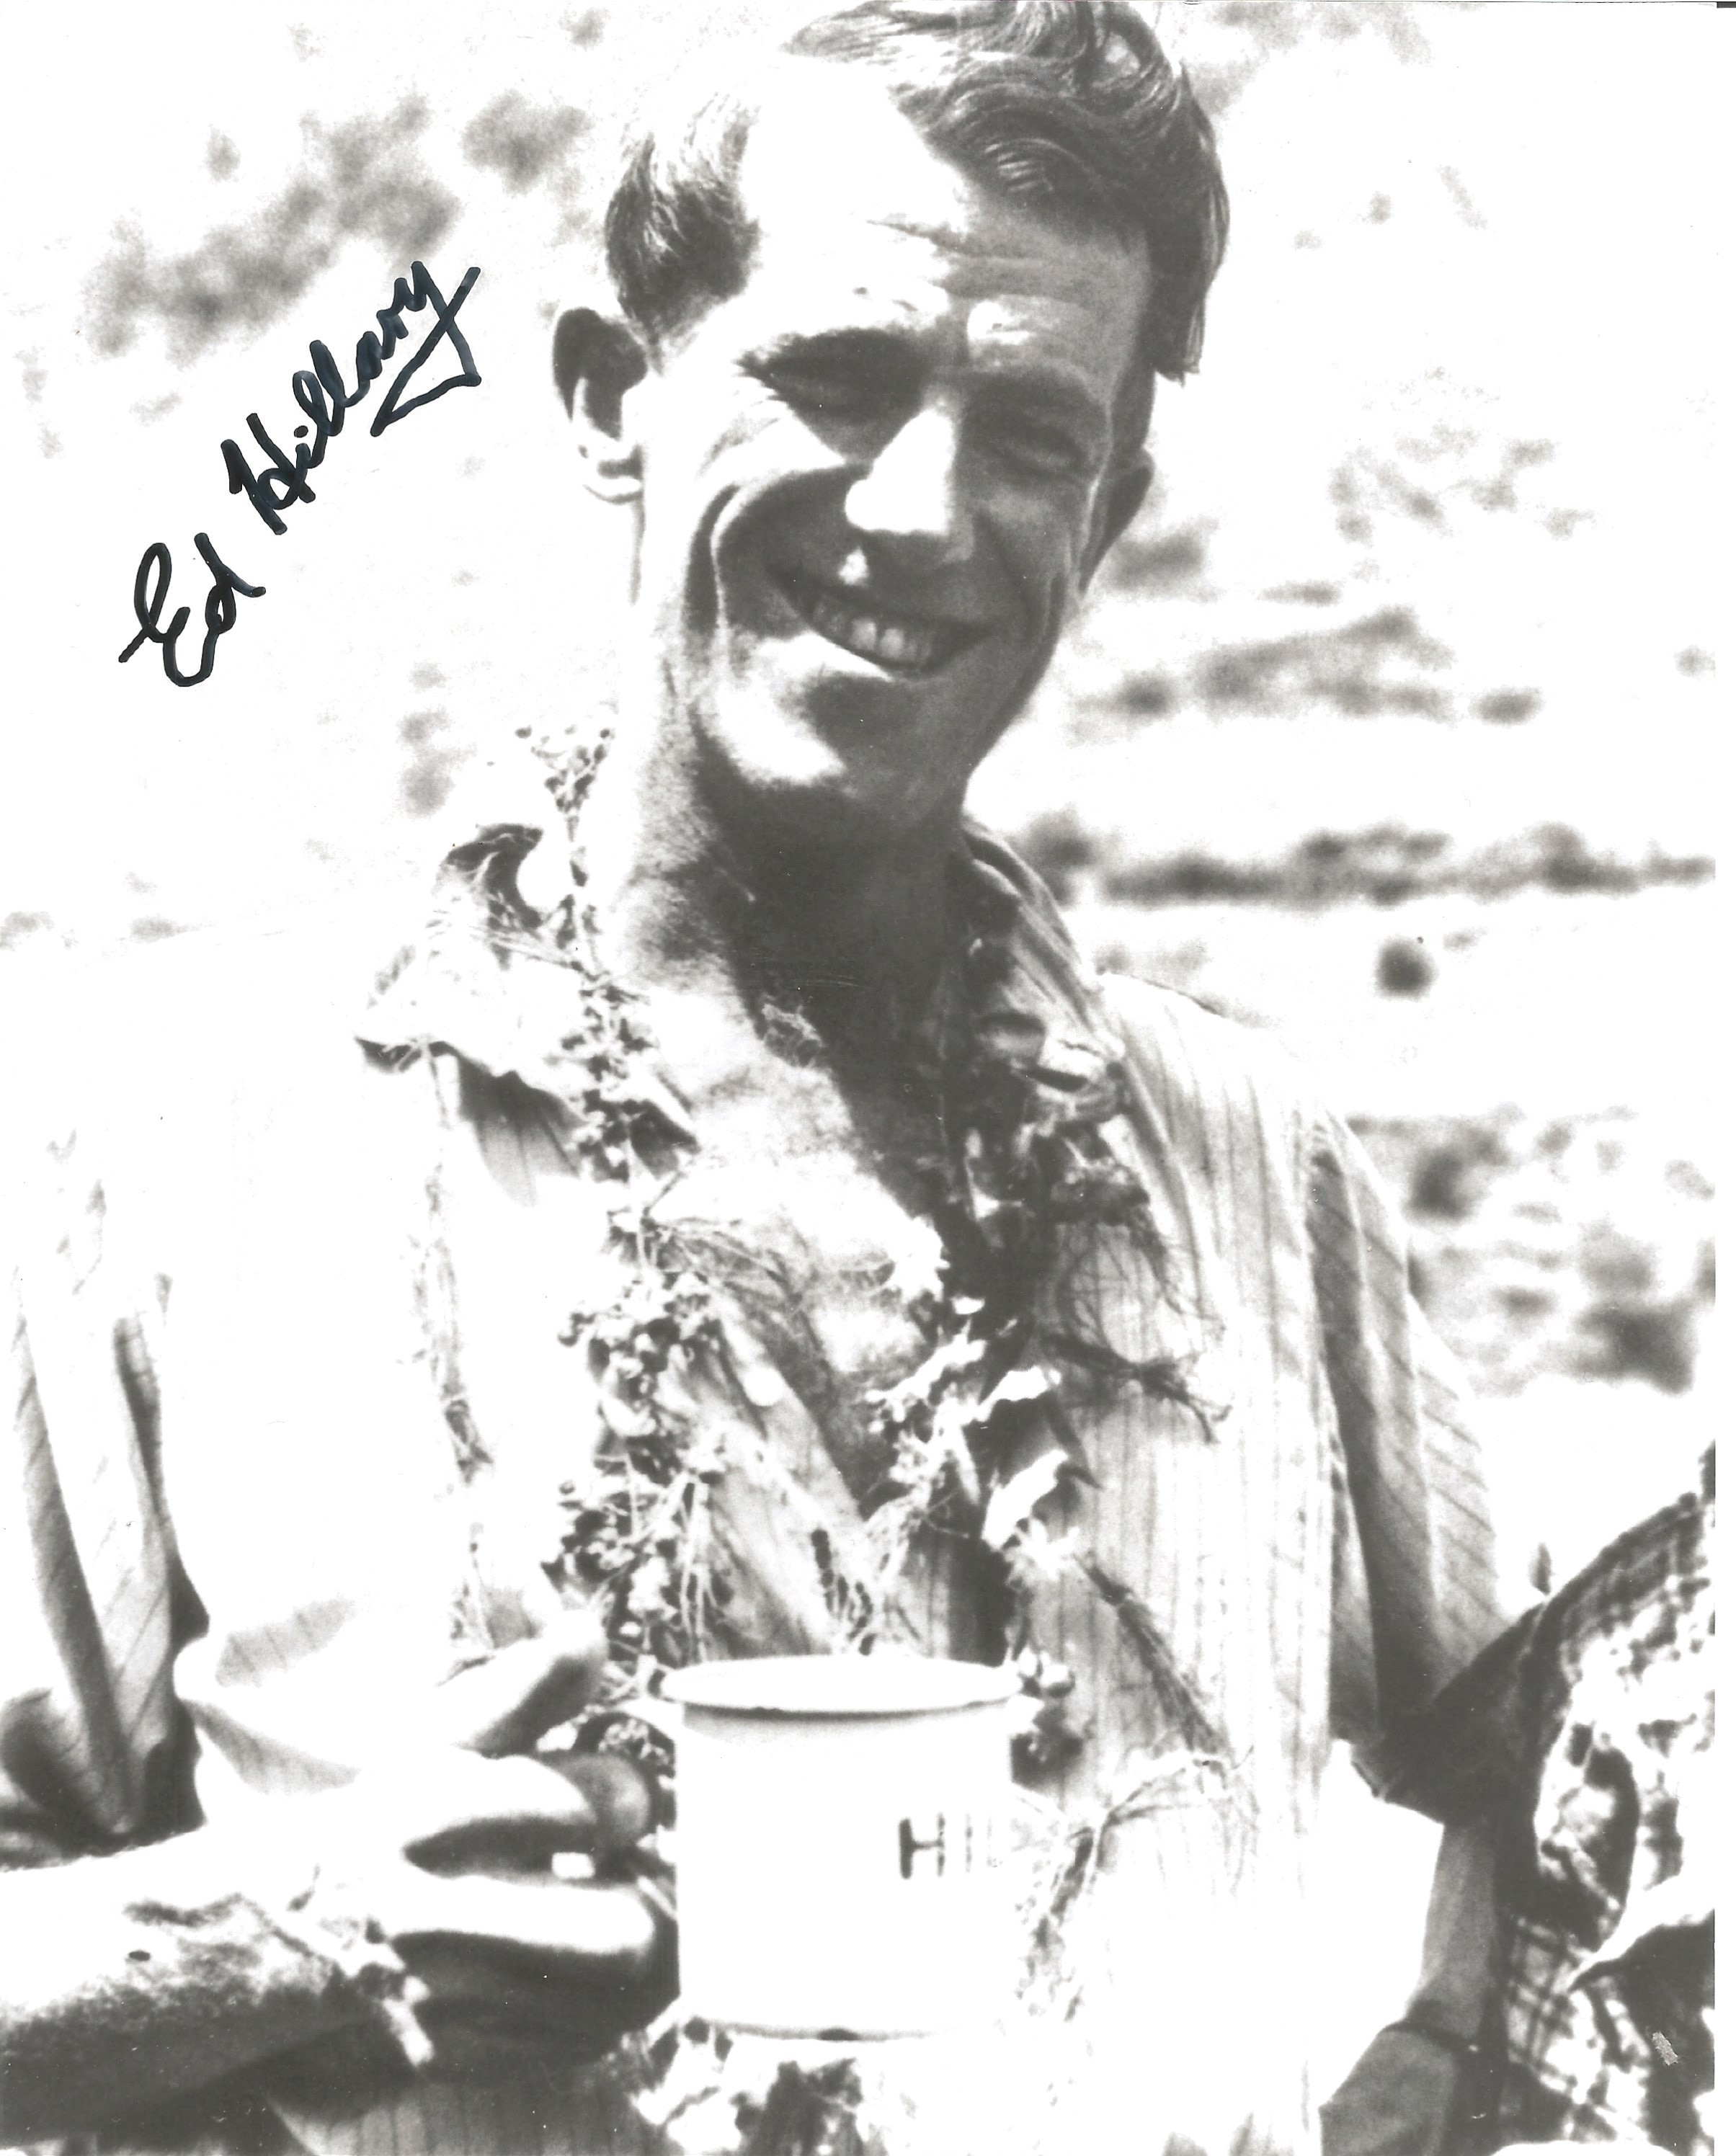 Sir Ed Hillary signed 12 x 8 inch b/w photo smiling shot with mug of tea in hand. Good condition.